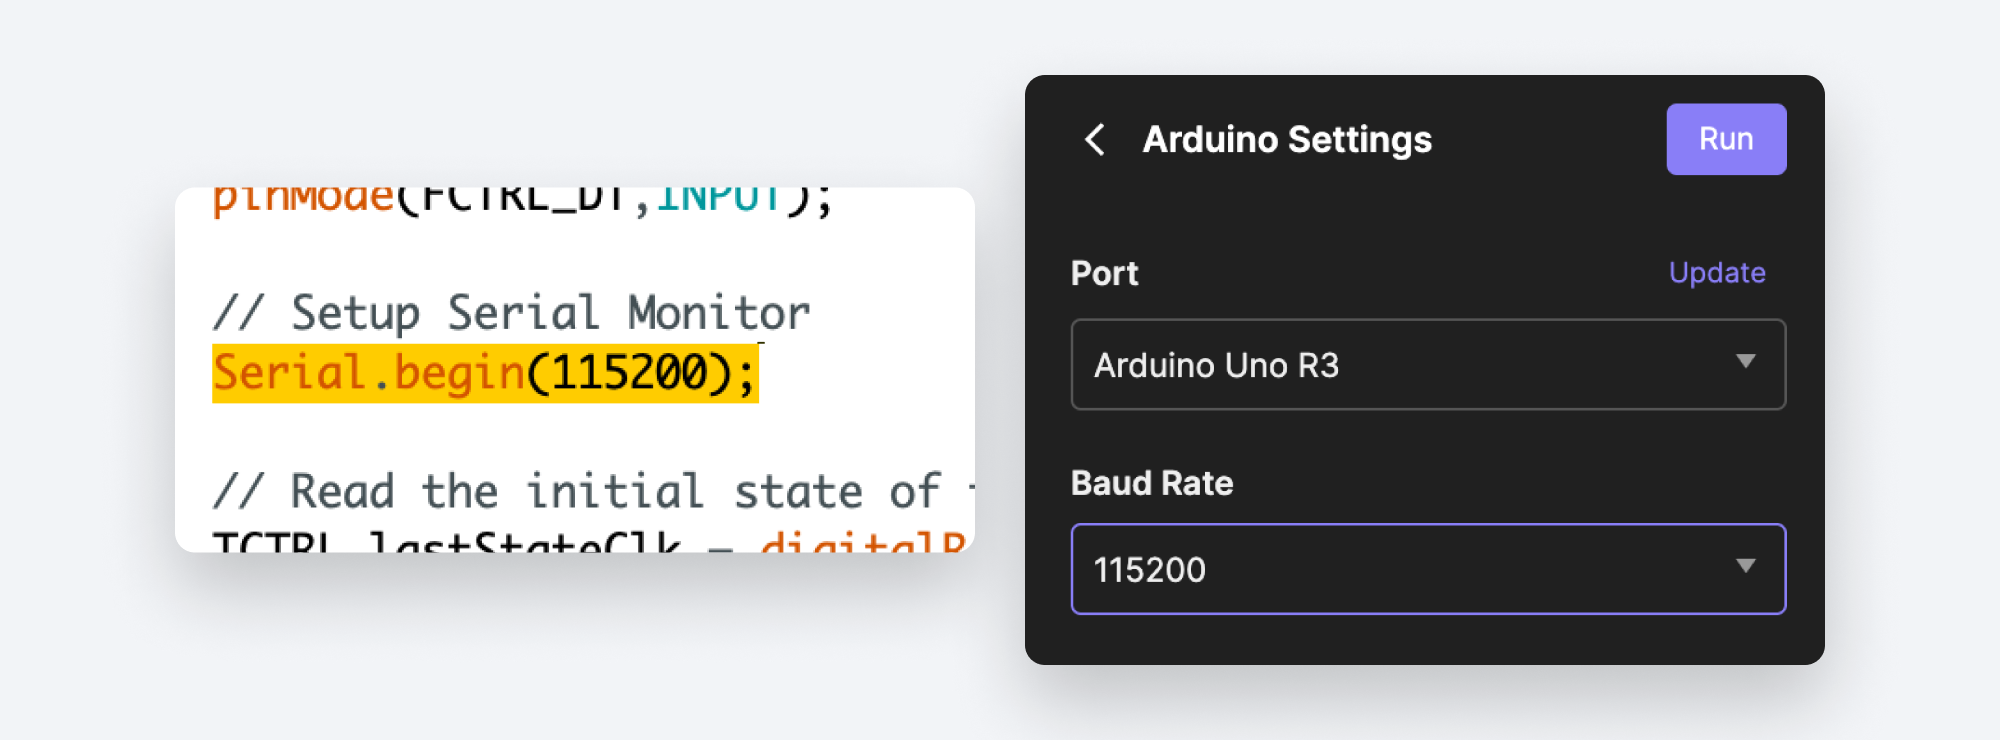 The baud rate you select in the plugin needs to match what you specified in your code.